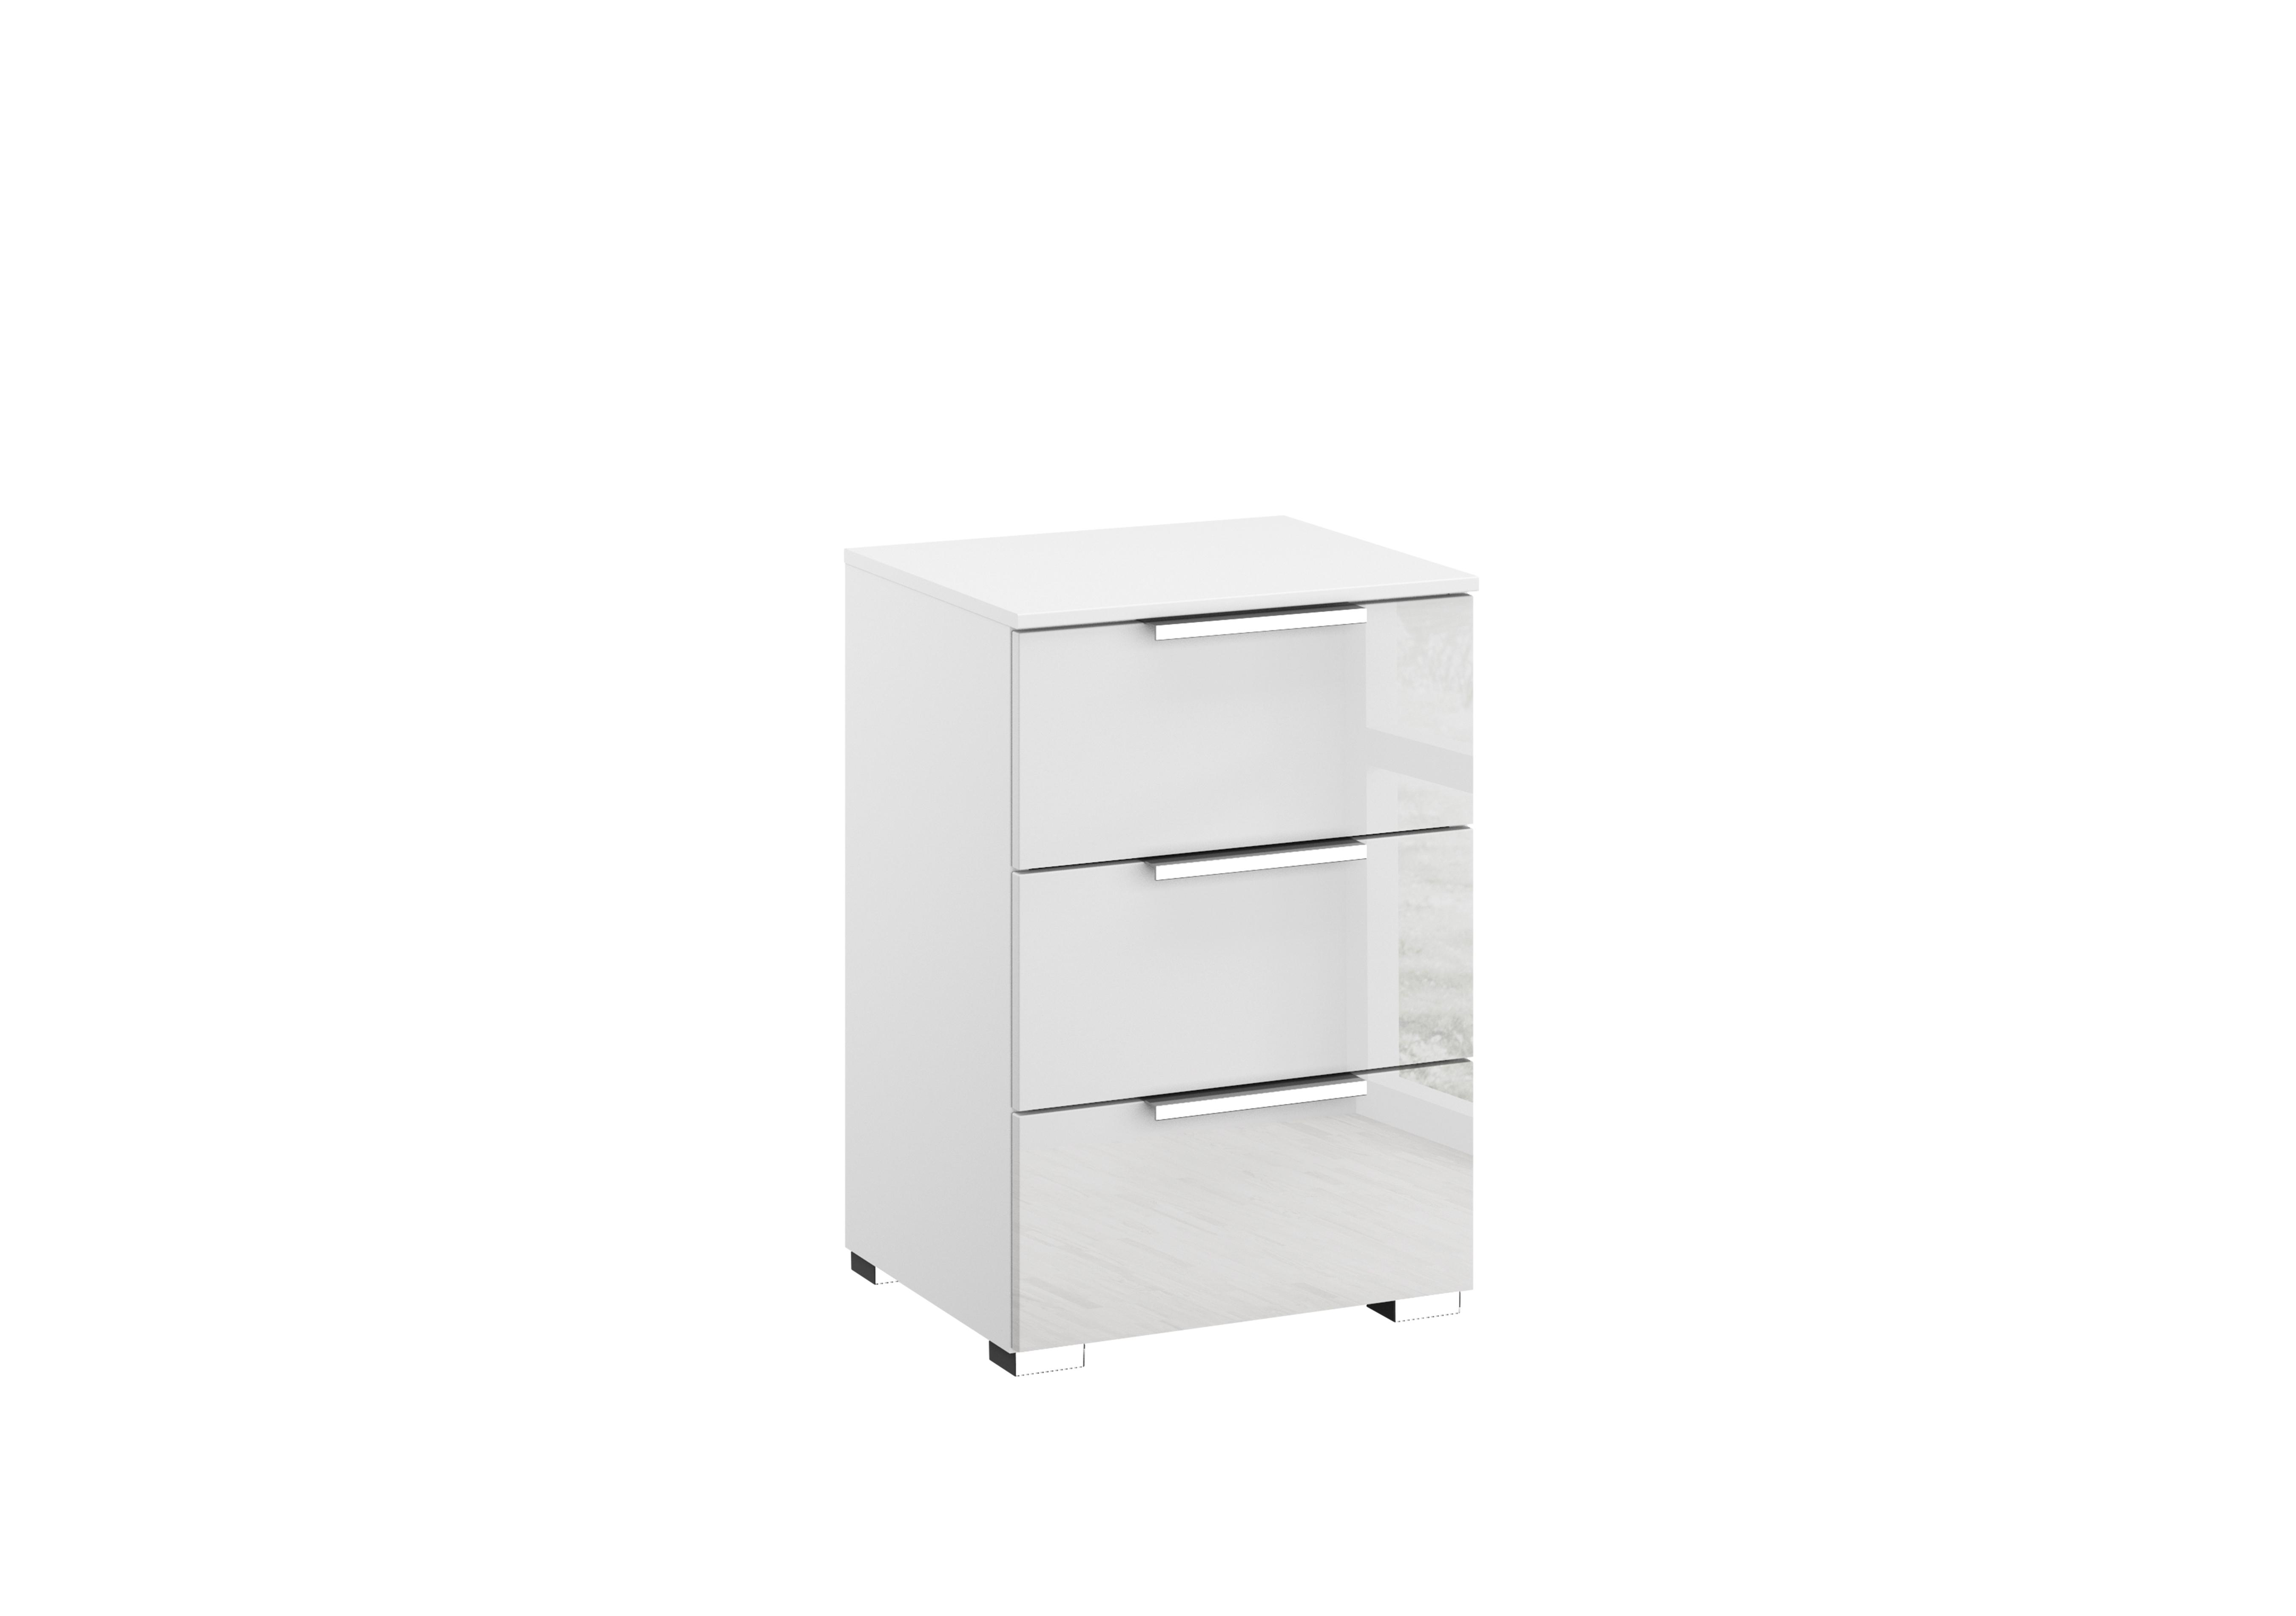 Formes Glass 3 Drawer Bedside Chest in A131b White White Front on Furniture Village